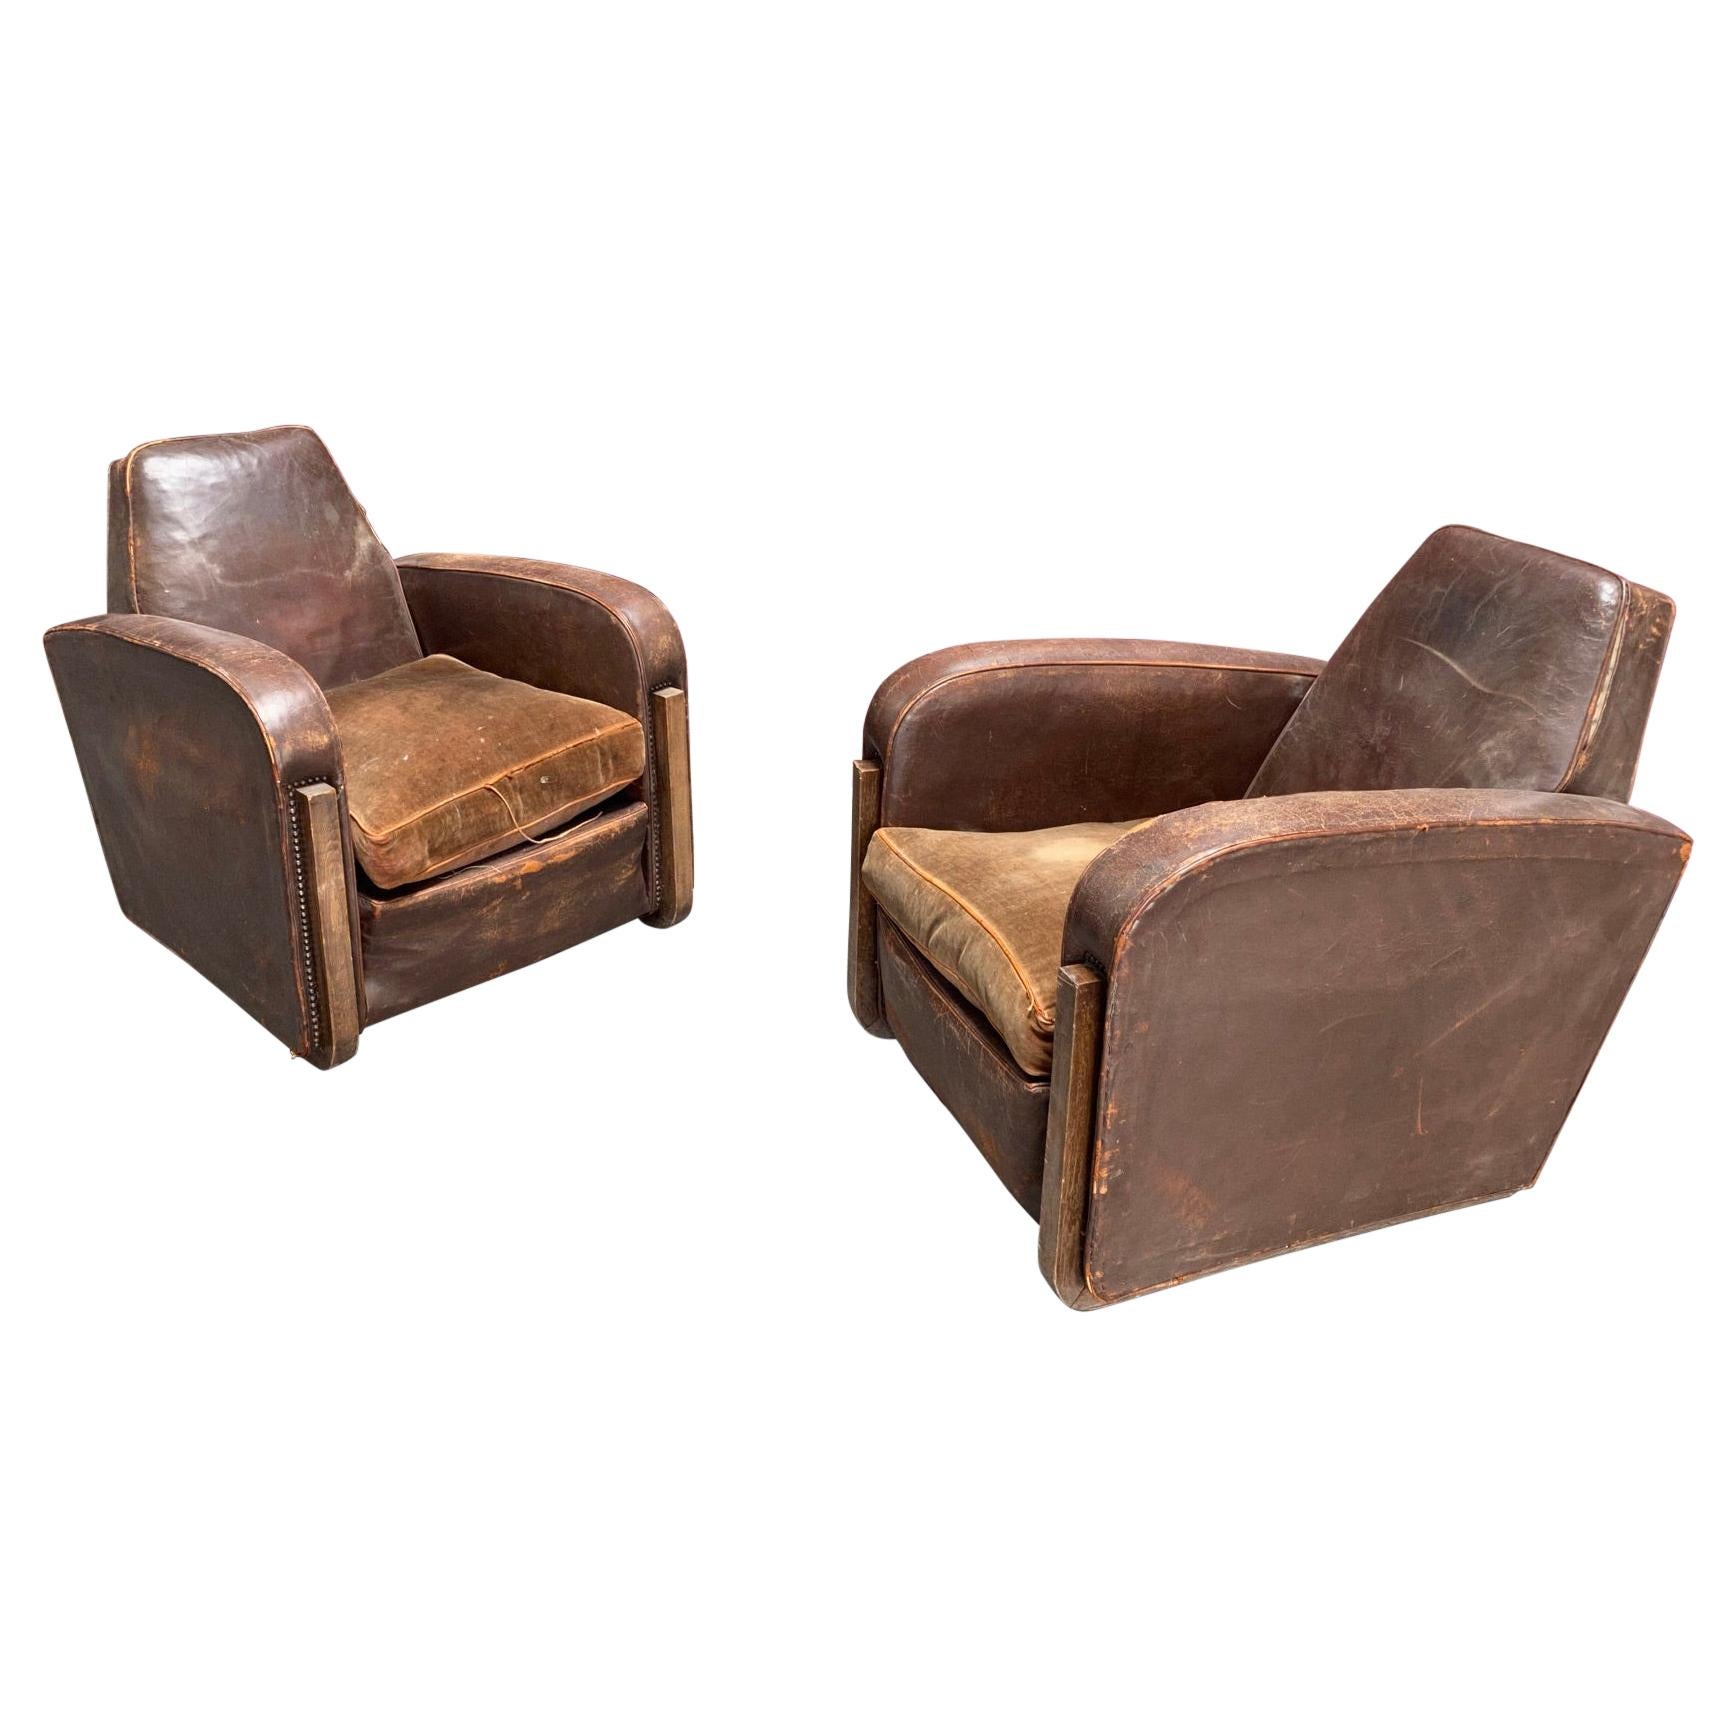 Two Large Elegant Art Deco Armchairs Covered in Leather, Sled Base, circa 1930 For Sale